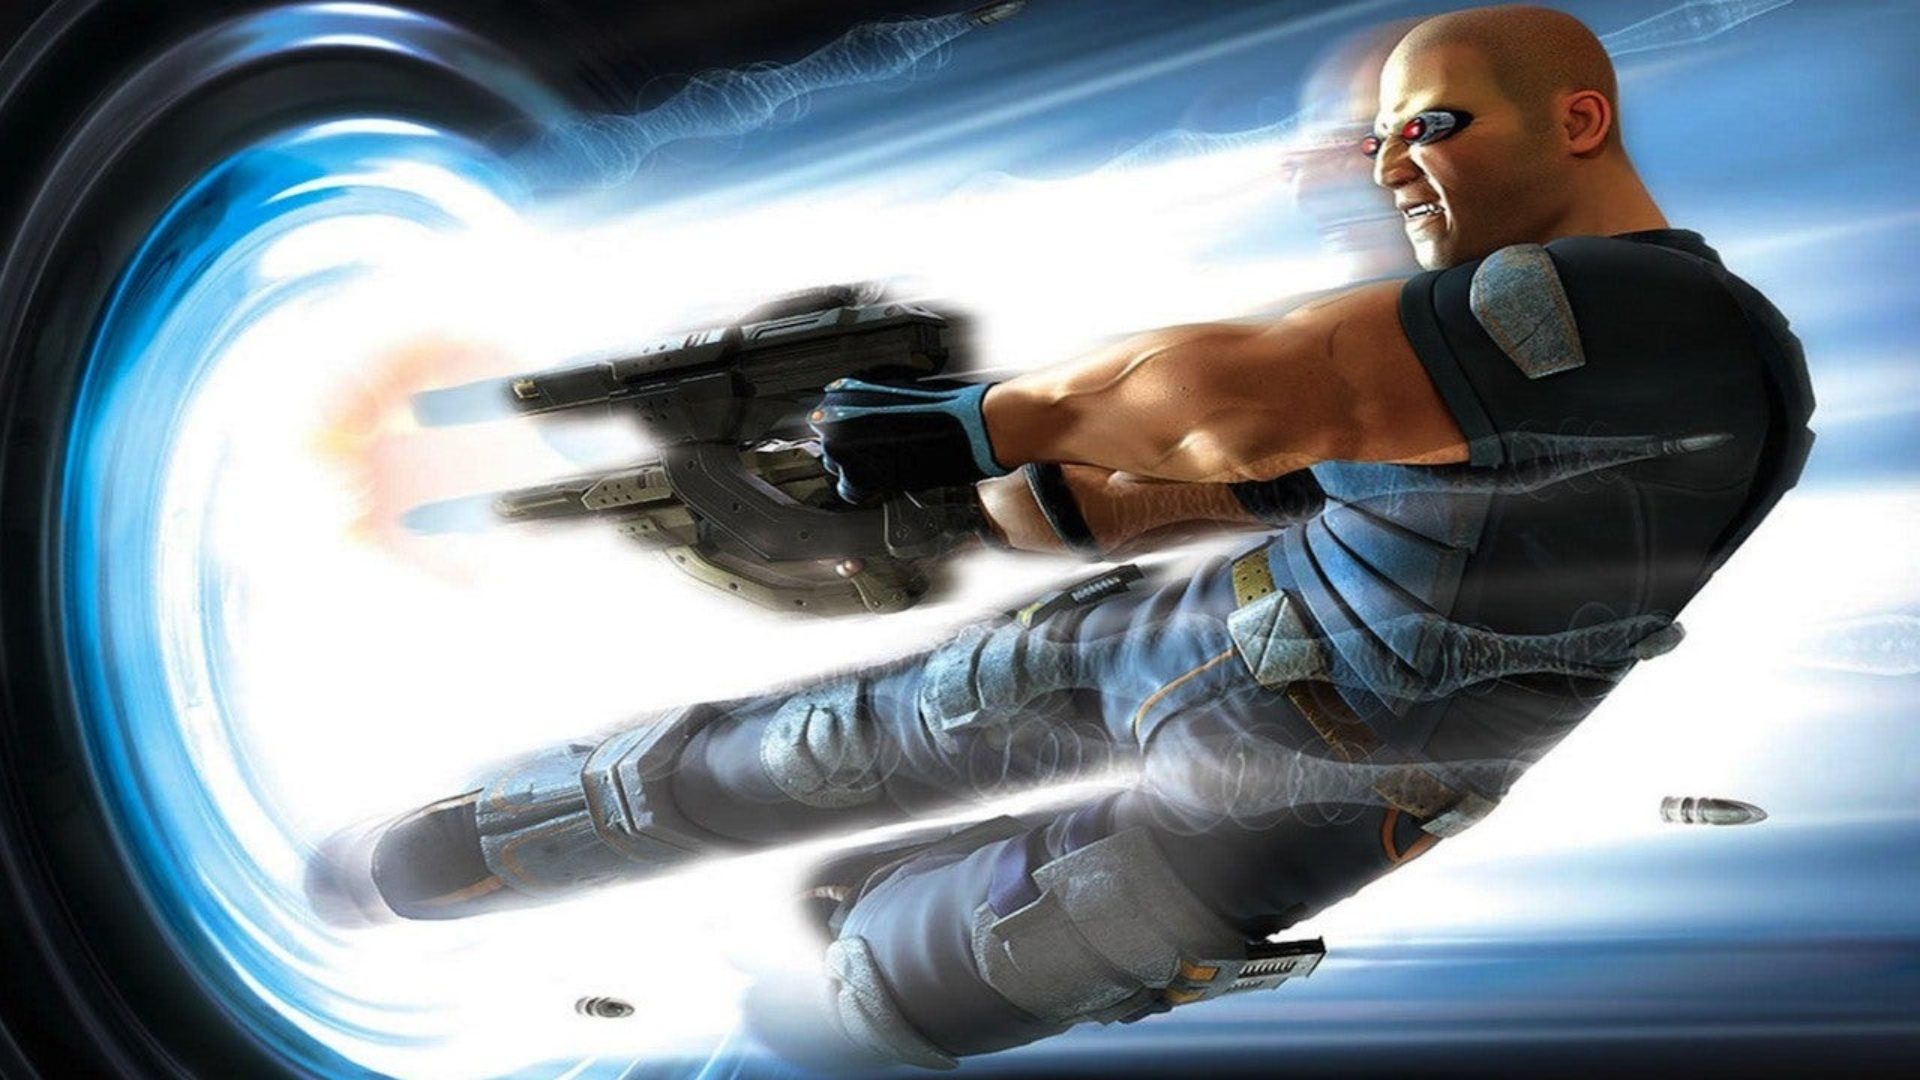 Deep Silver announces the return of the TimeSplitters license

